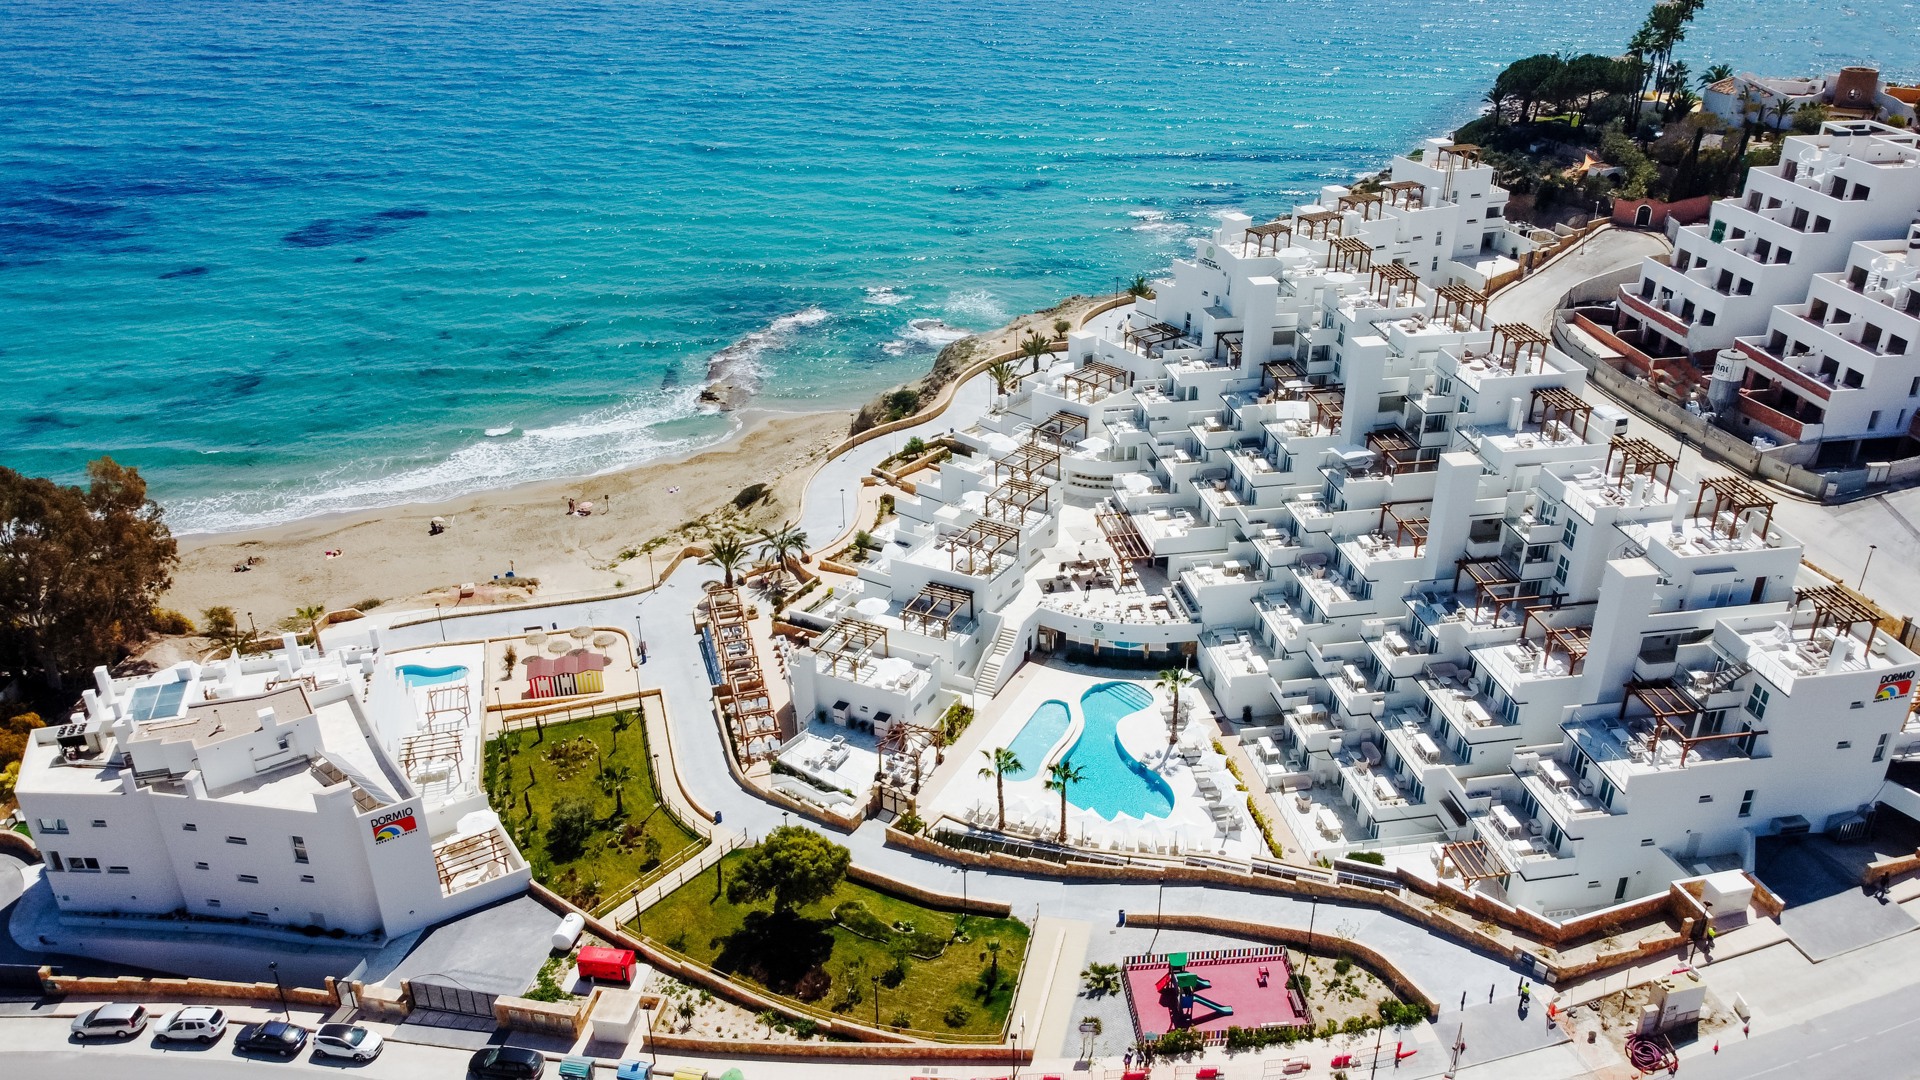 Highly recommended: stay at a luxury beach resort in El Campello